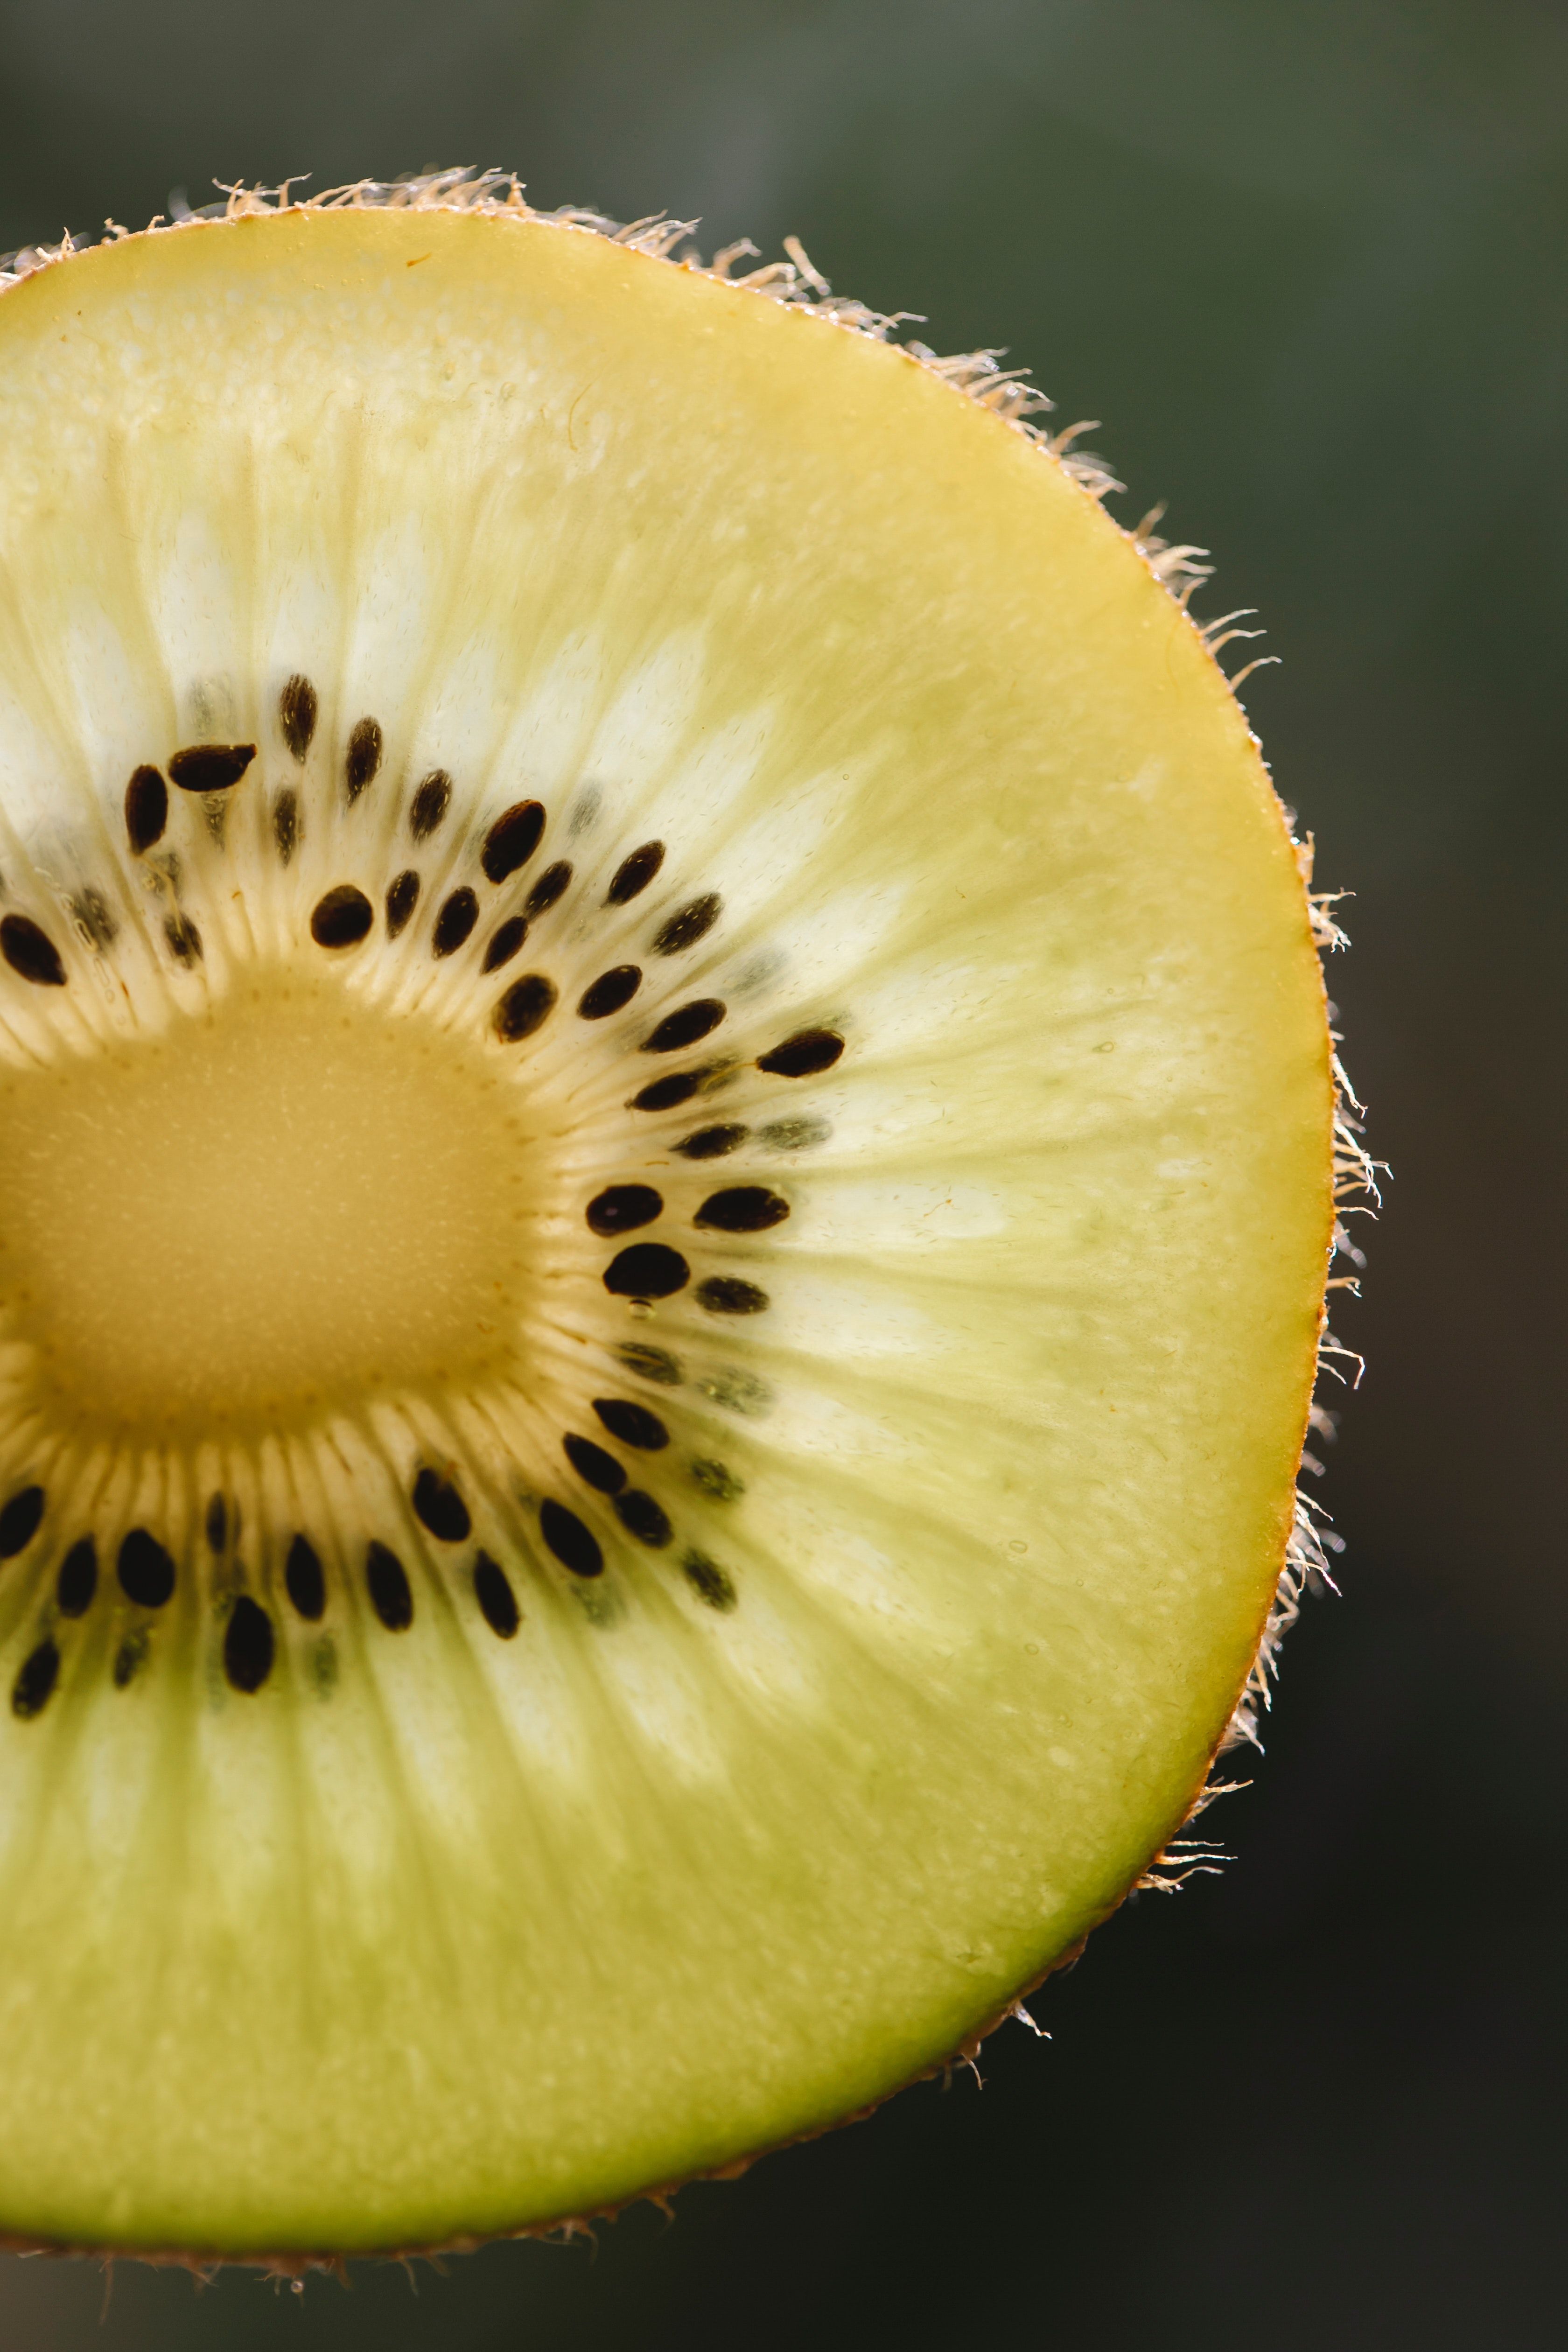 What is a kiwi?